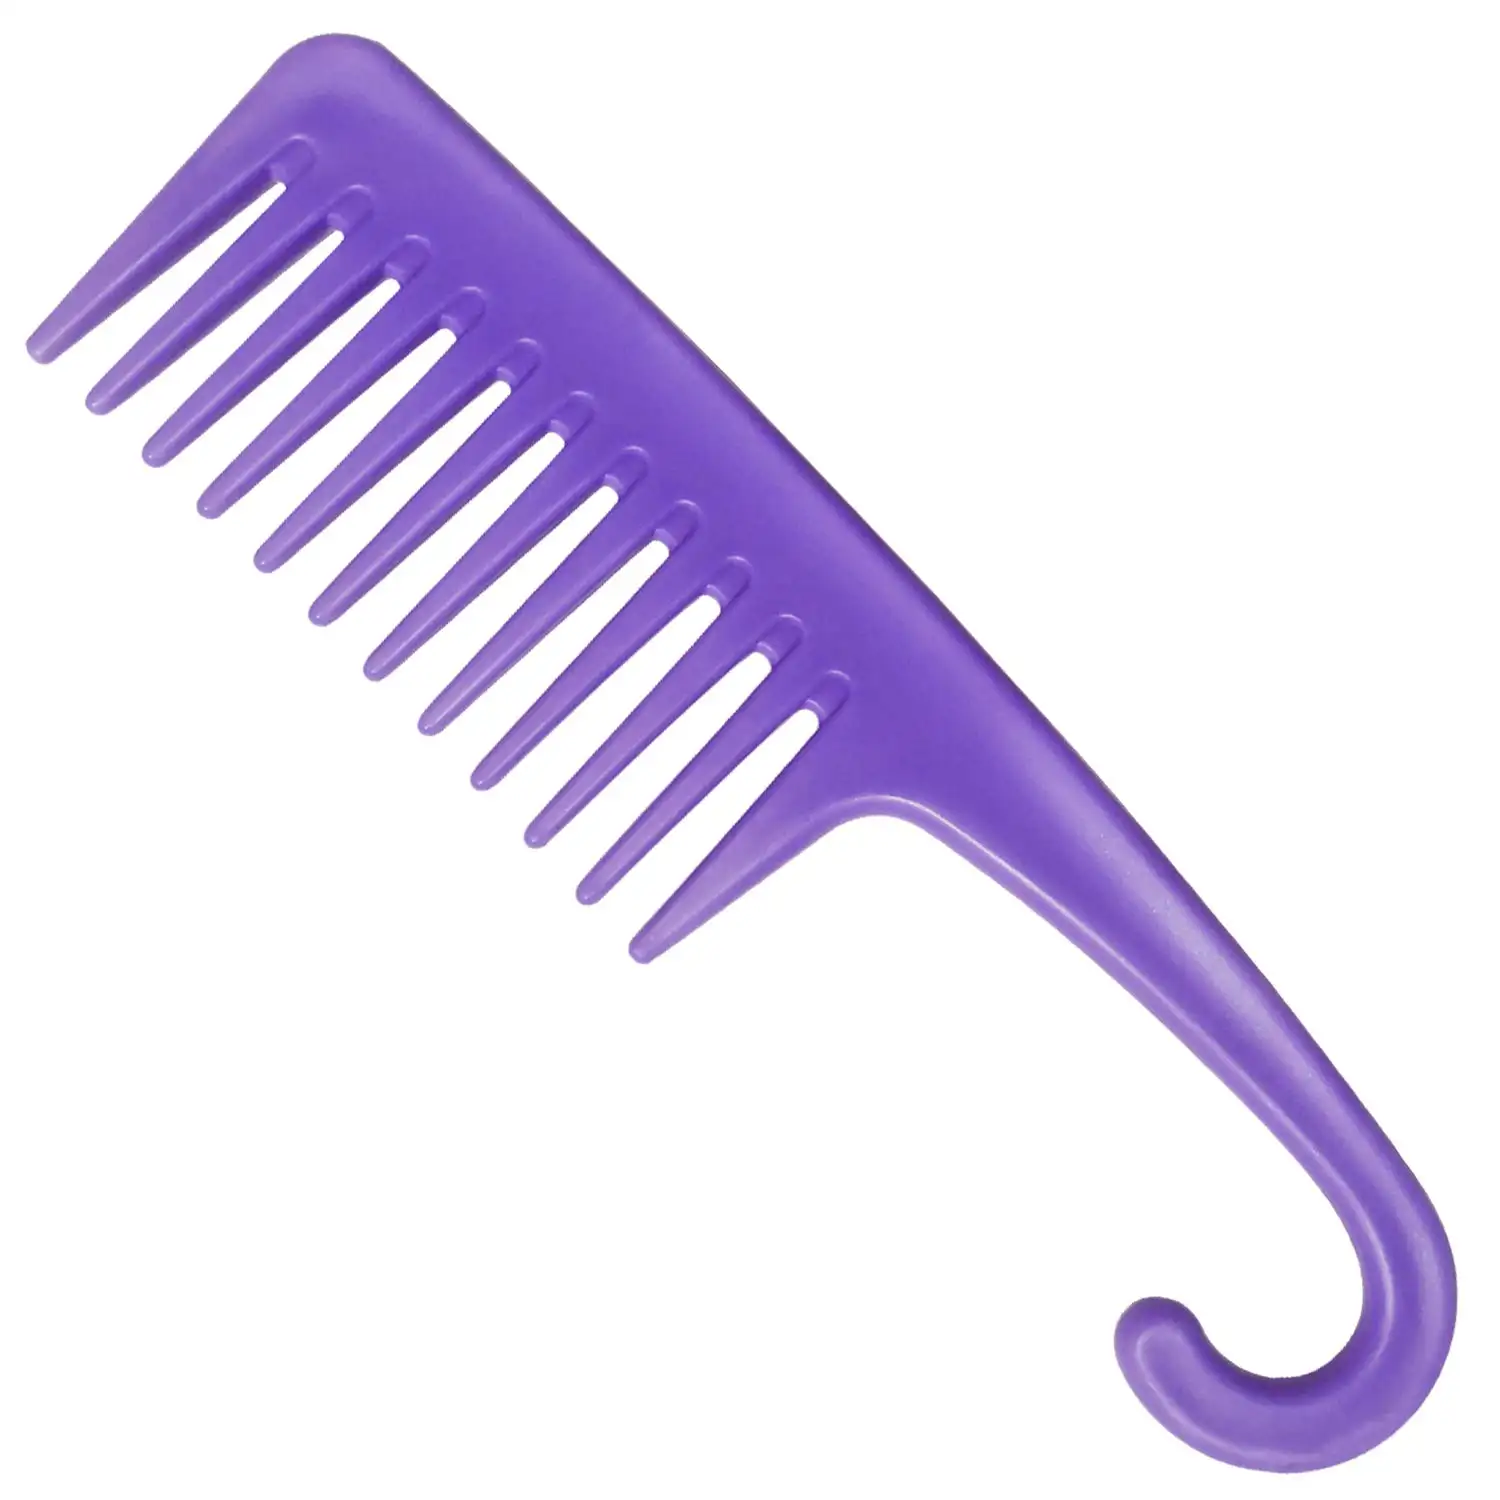 Wide Tooth Comb Detangling Hair Brush, Premium Care Handgrip Comb, Apply to For Curly, Wet, Dry, Thick Hair Etc